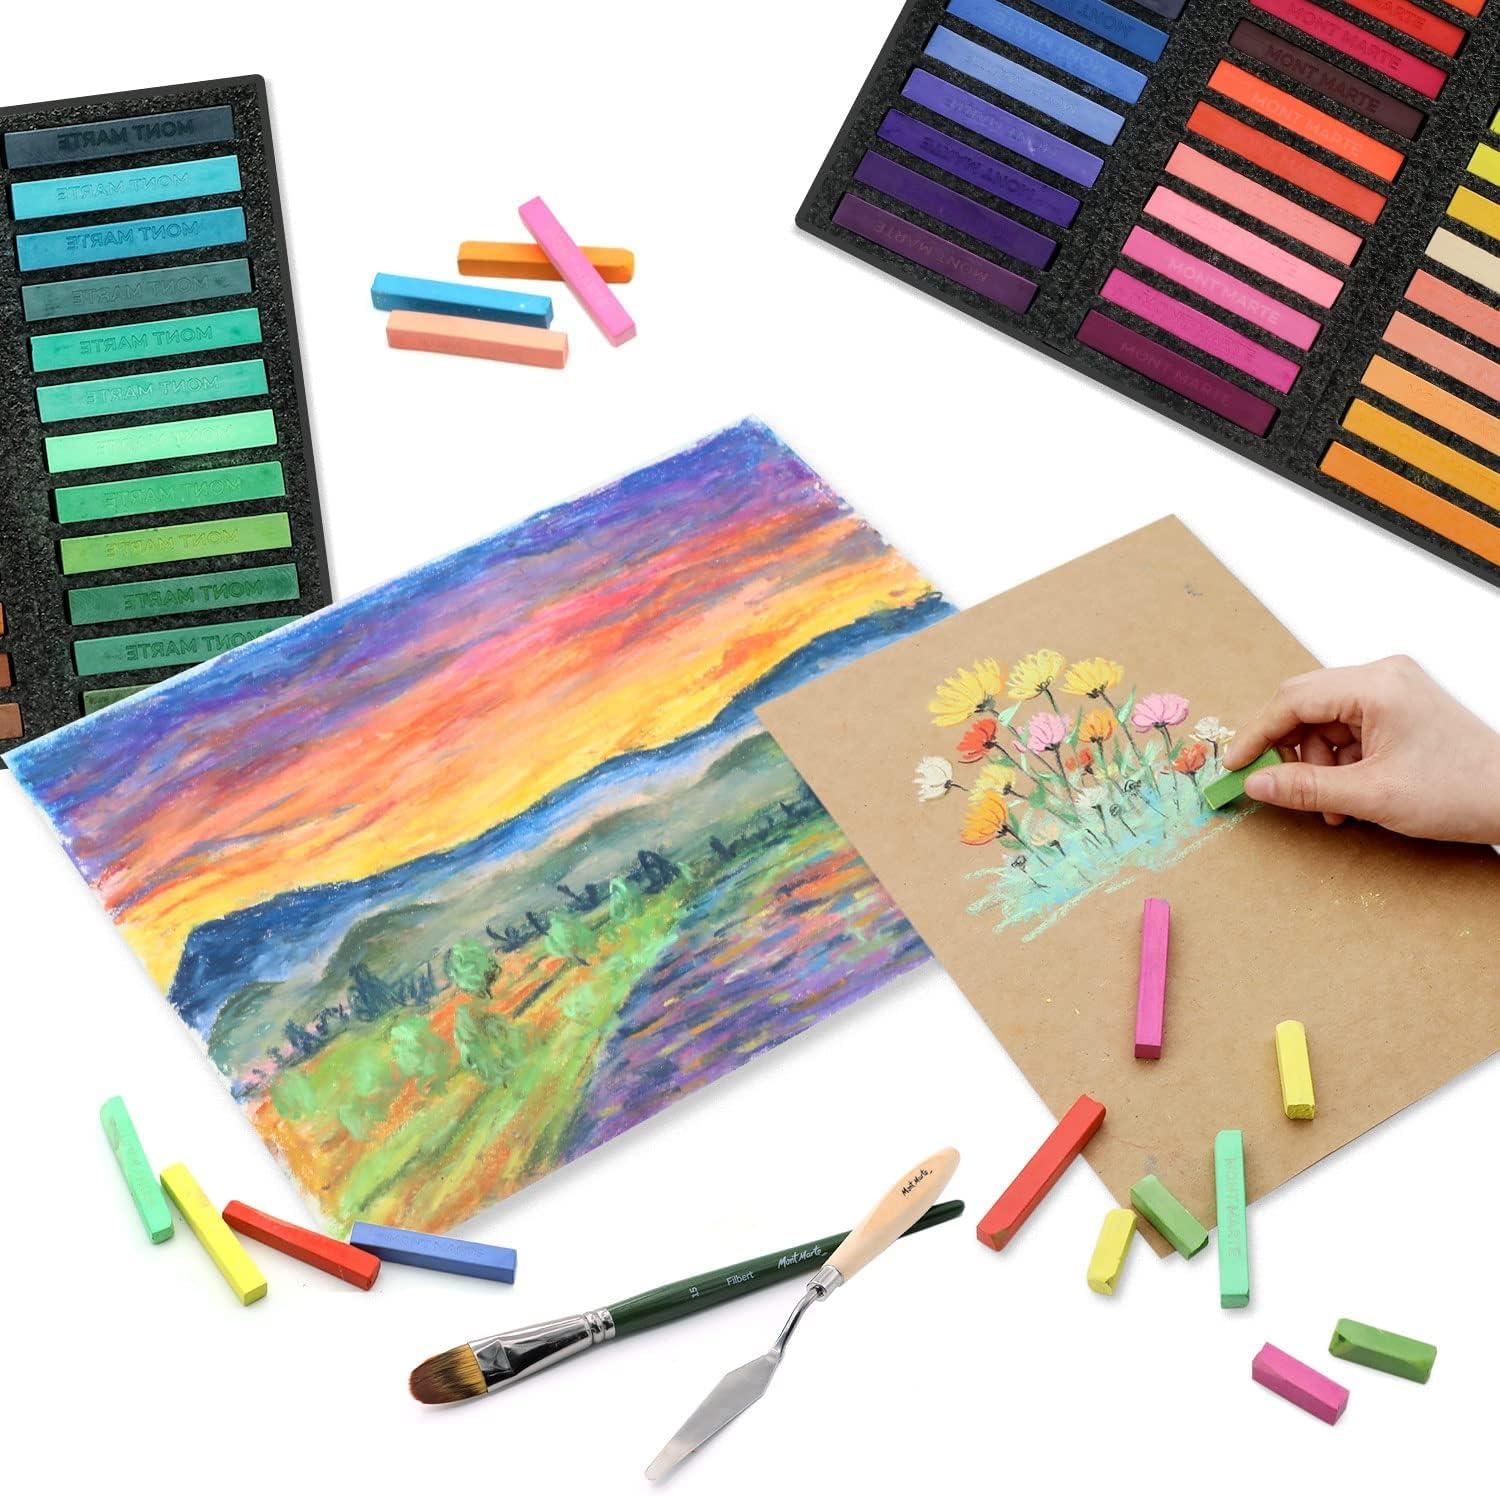 MONT MARTE Watersoluble Oil Pastels in Tin Box Signature 48pc, 48 Assorted  Colors, Great Blending and Layering, Comes in Storage Case, Ideal for Art